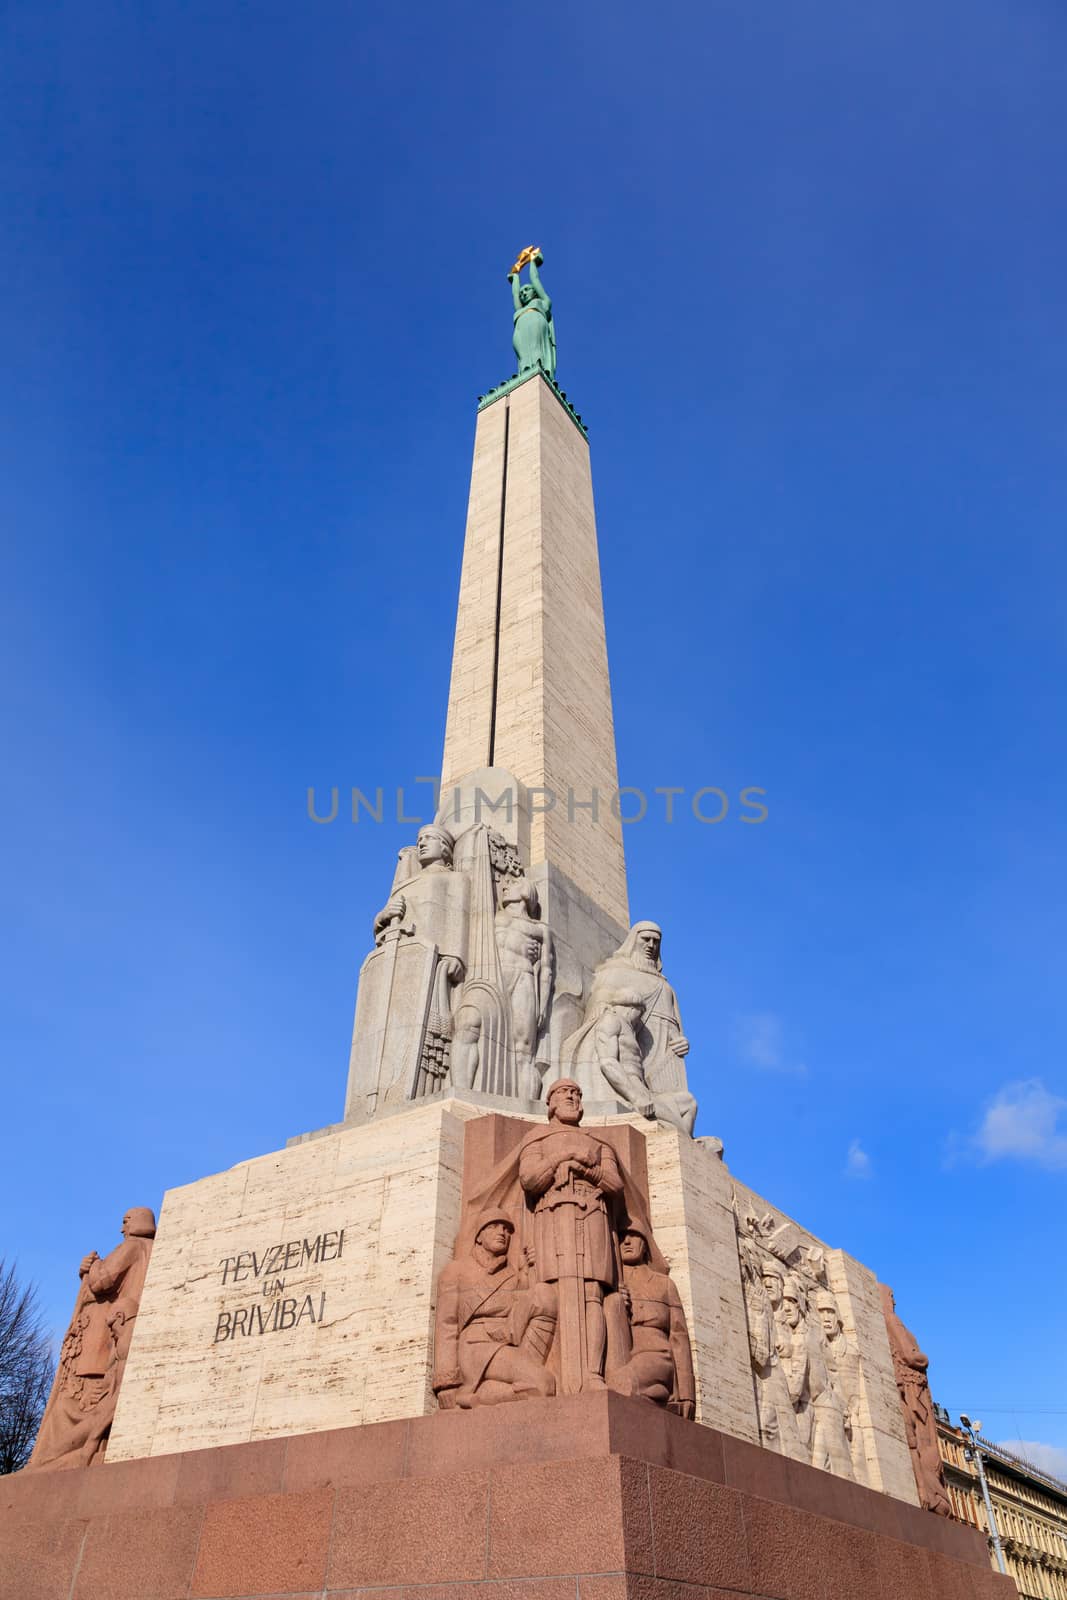 The Freedom Monument by ATGImages